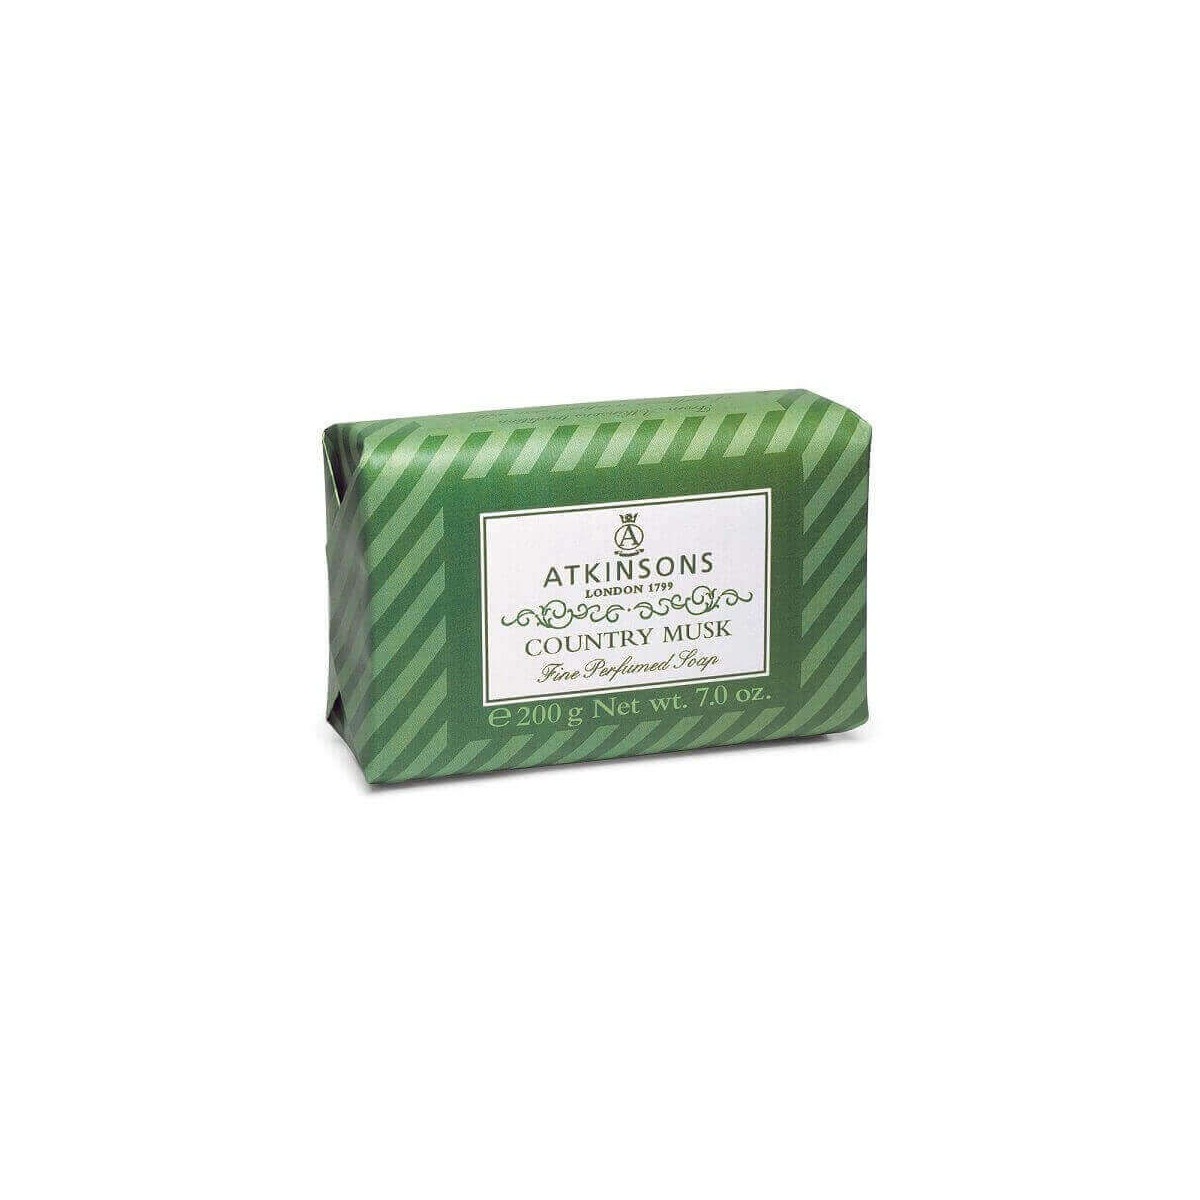 Atkinsons Country Musk Sapone 200g